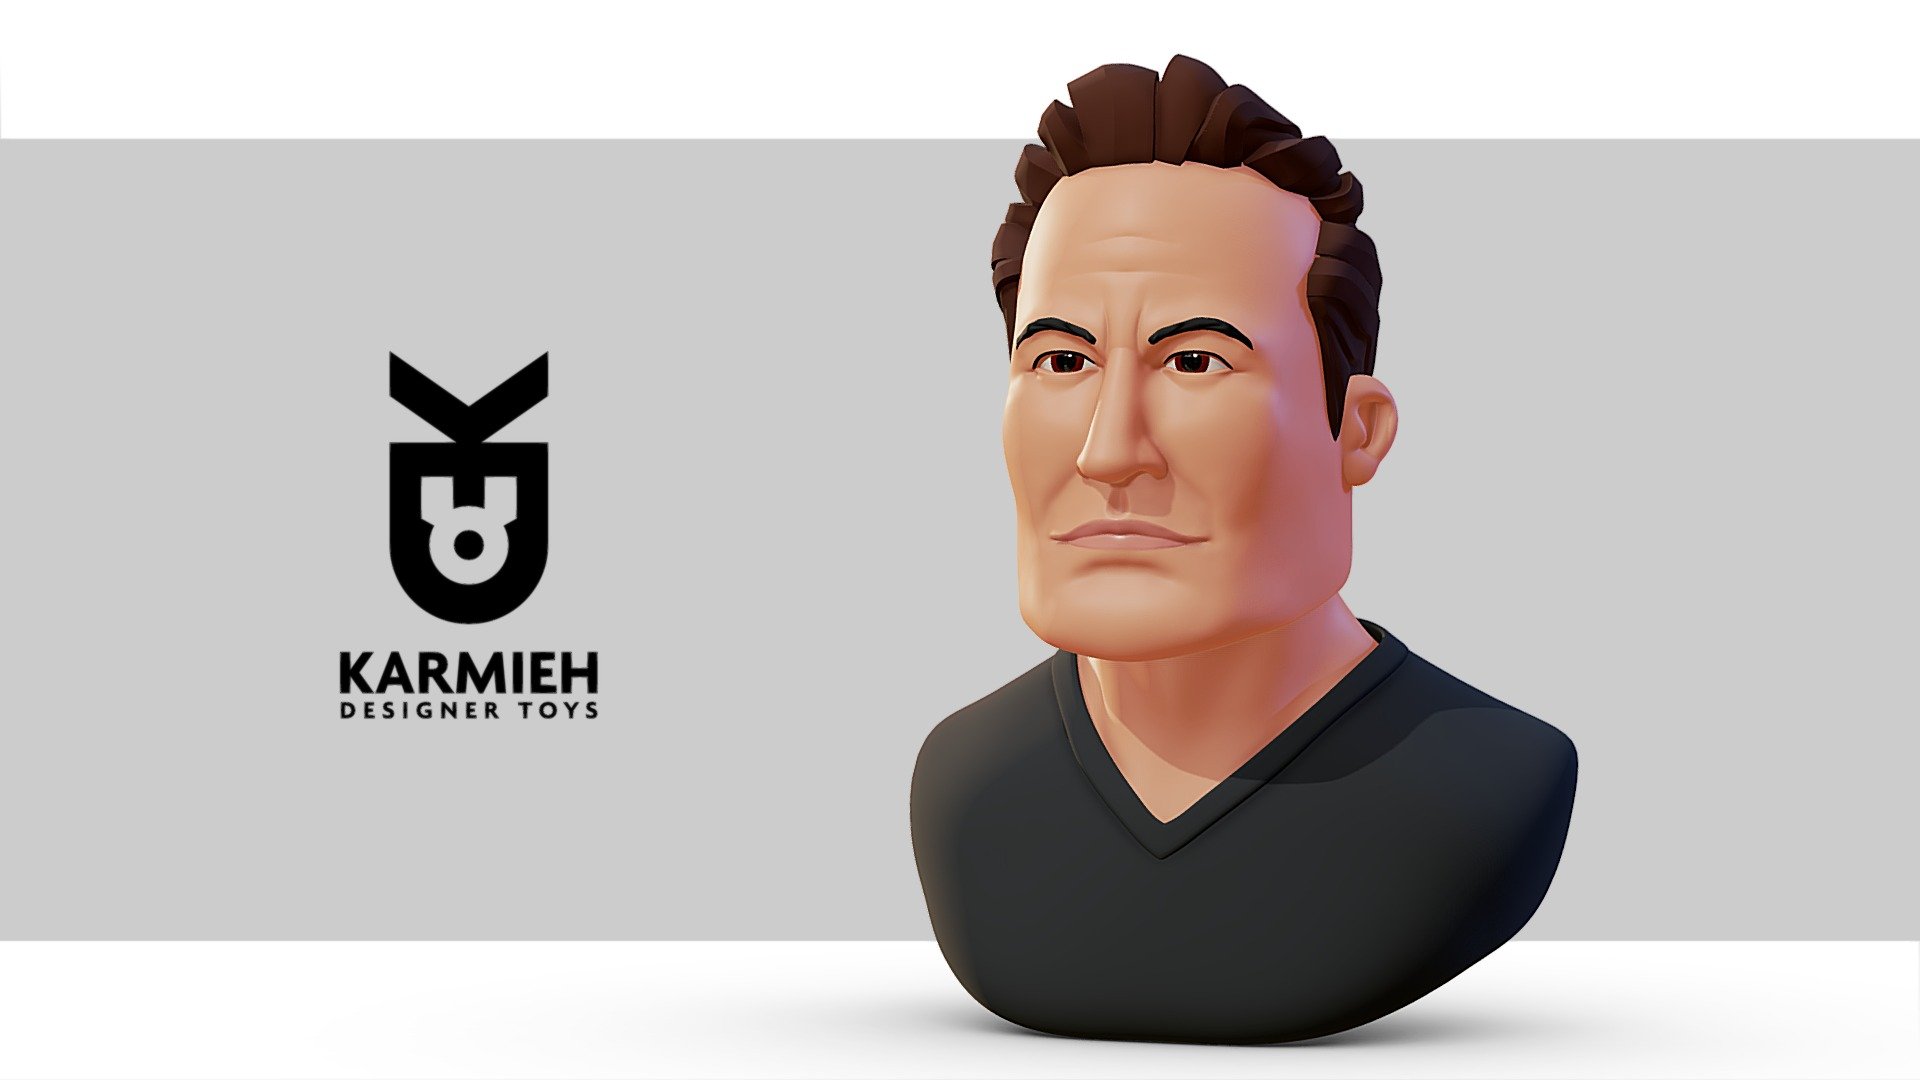 A new bust sculpt, took way longer than a morning warmup sculpt. I struggled to keep the sculpt cartoony yet capturing his likeness. 
As always sculpted in ZBrush 
I also recorded a tutorial on this piece, so I should have it out pretty soon as-well.
https://oasim.com/ - Elon Musk - 3D model by Oasim Karmieh (@pixelbudah) 3d model